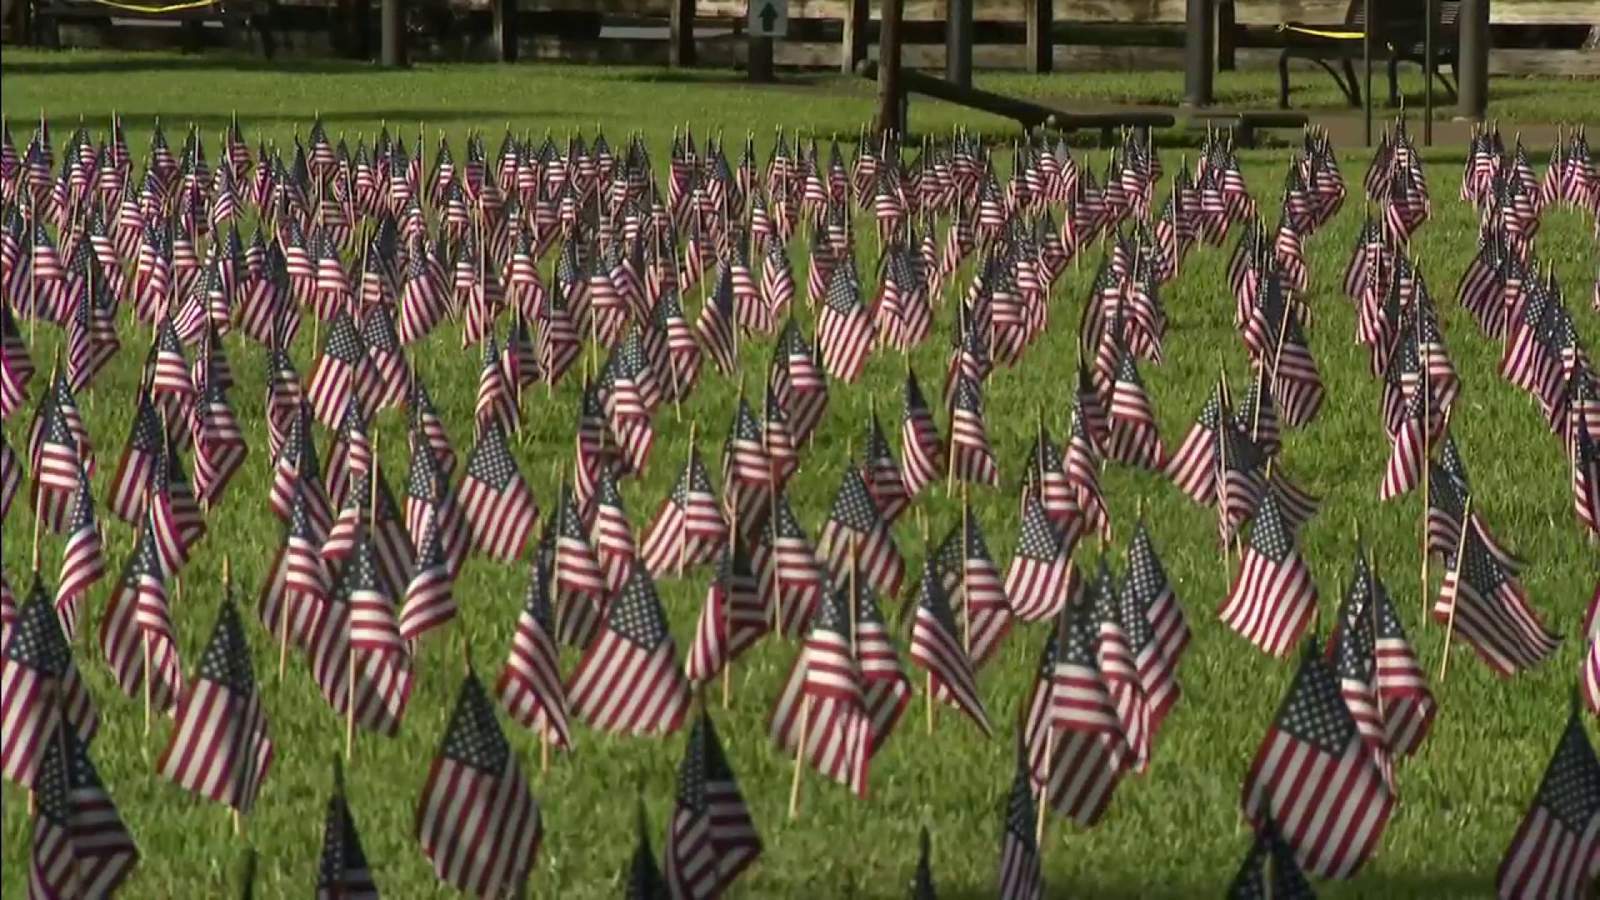 Local tributes remember those lost in 9/11